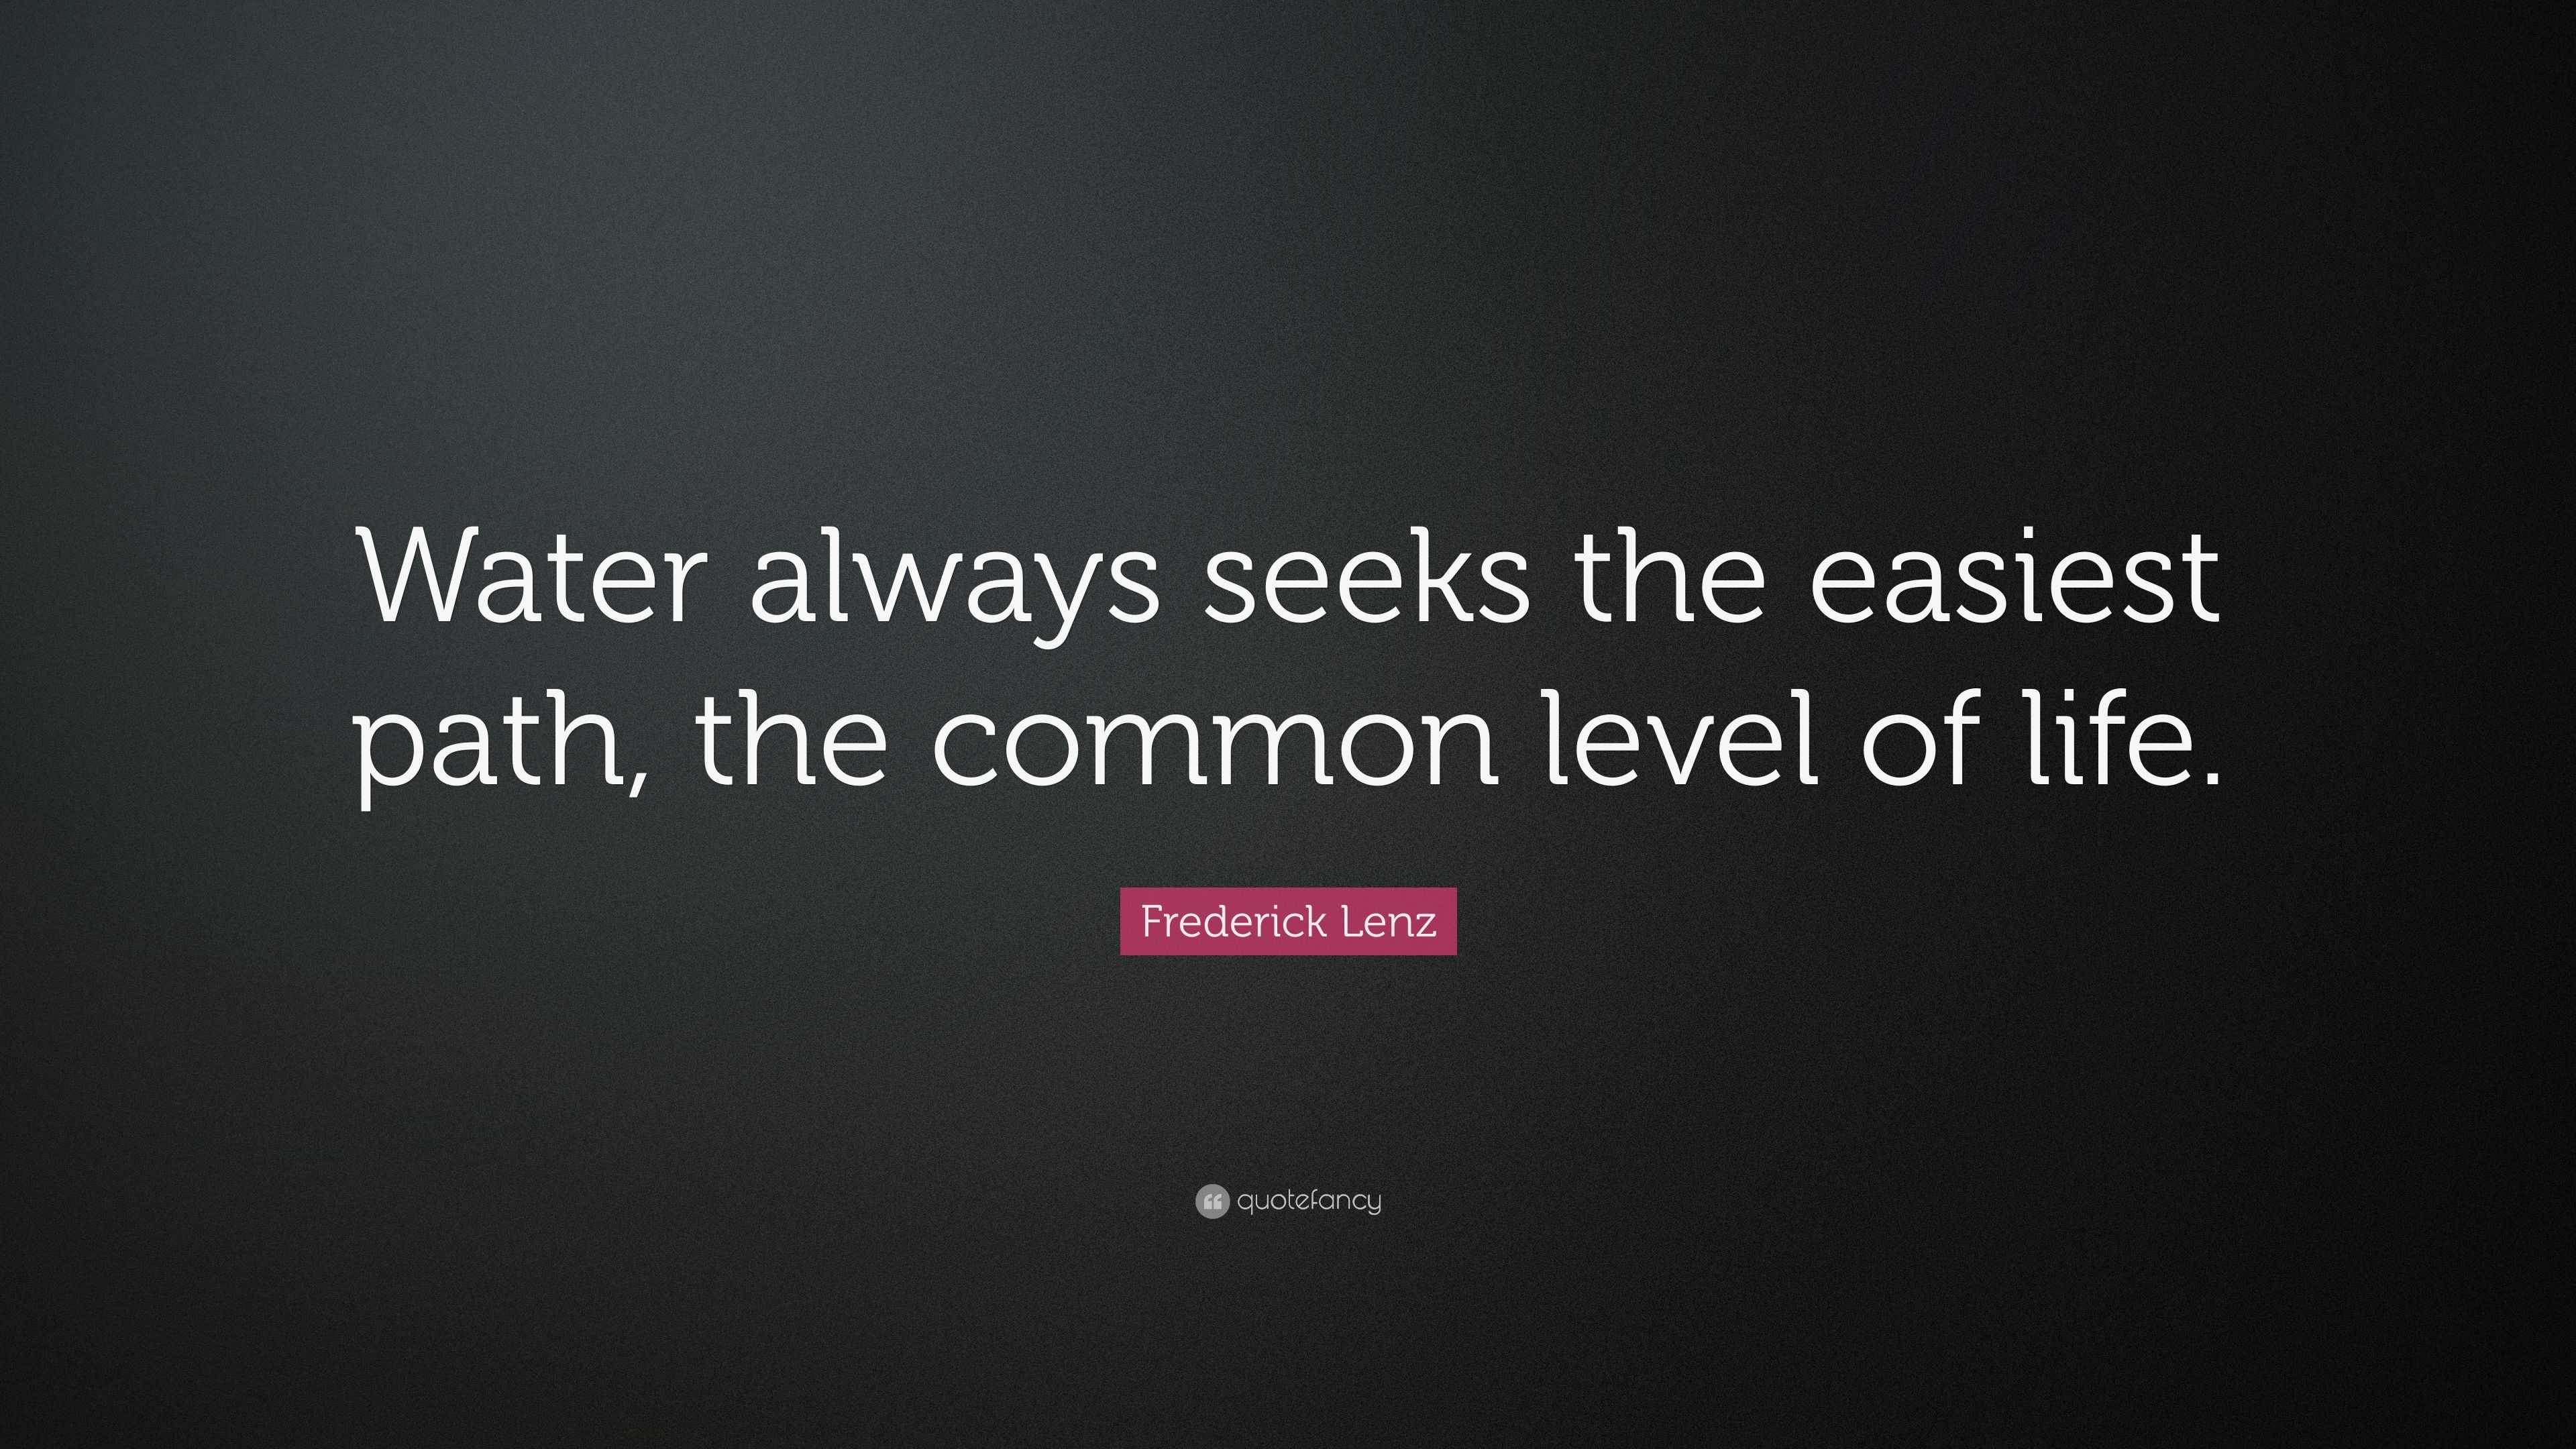 Frederick Lenz Quote: “Water always seeks the easiest path, the common ...